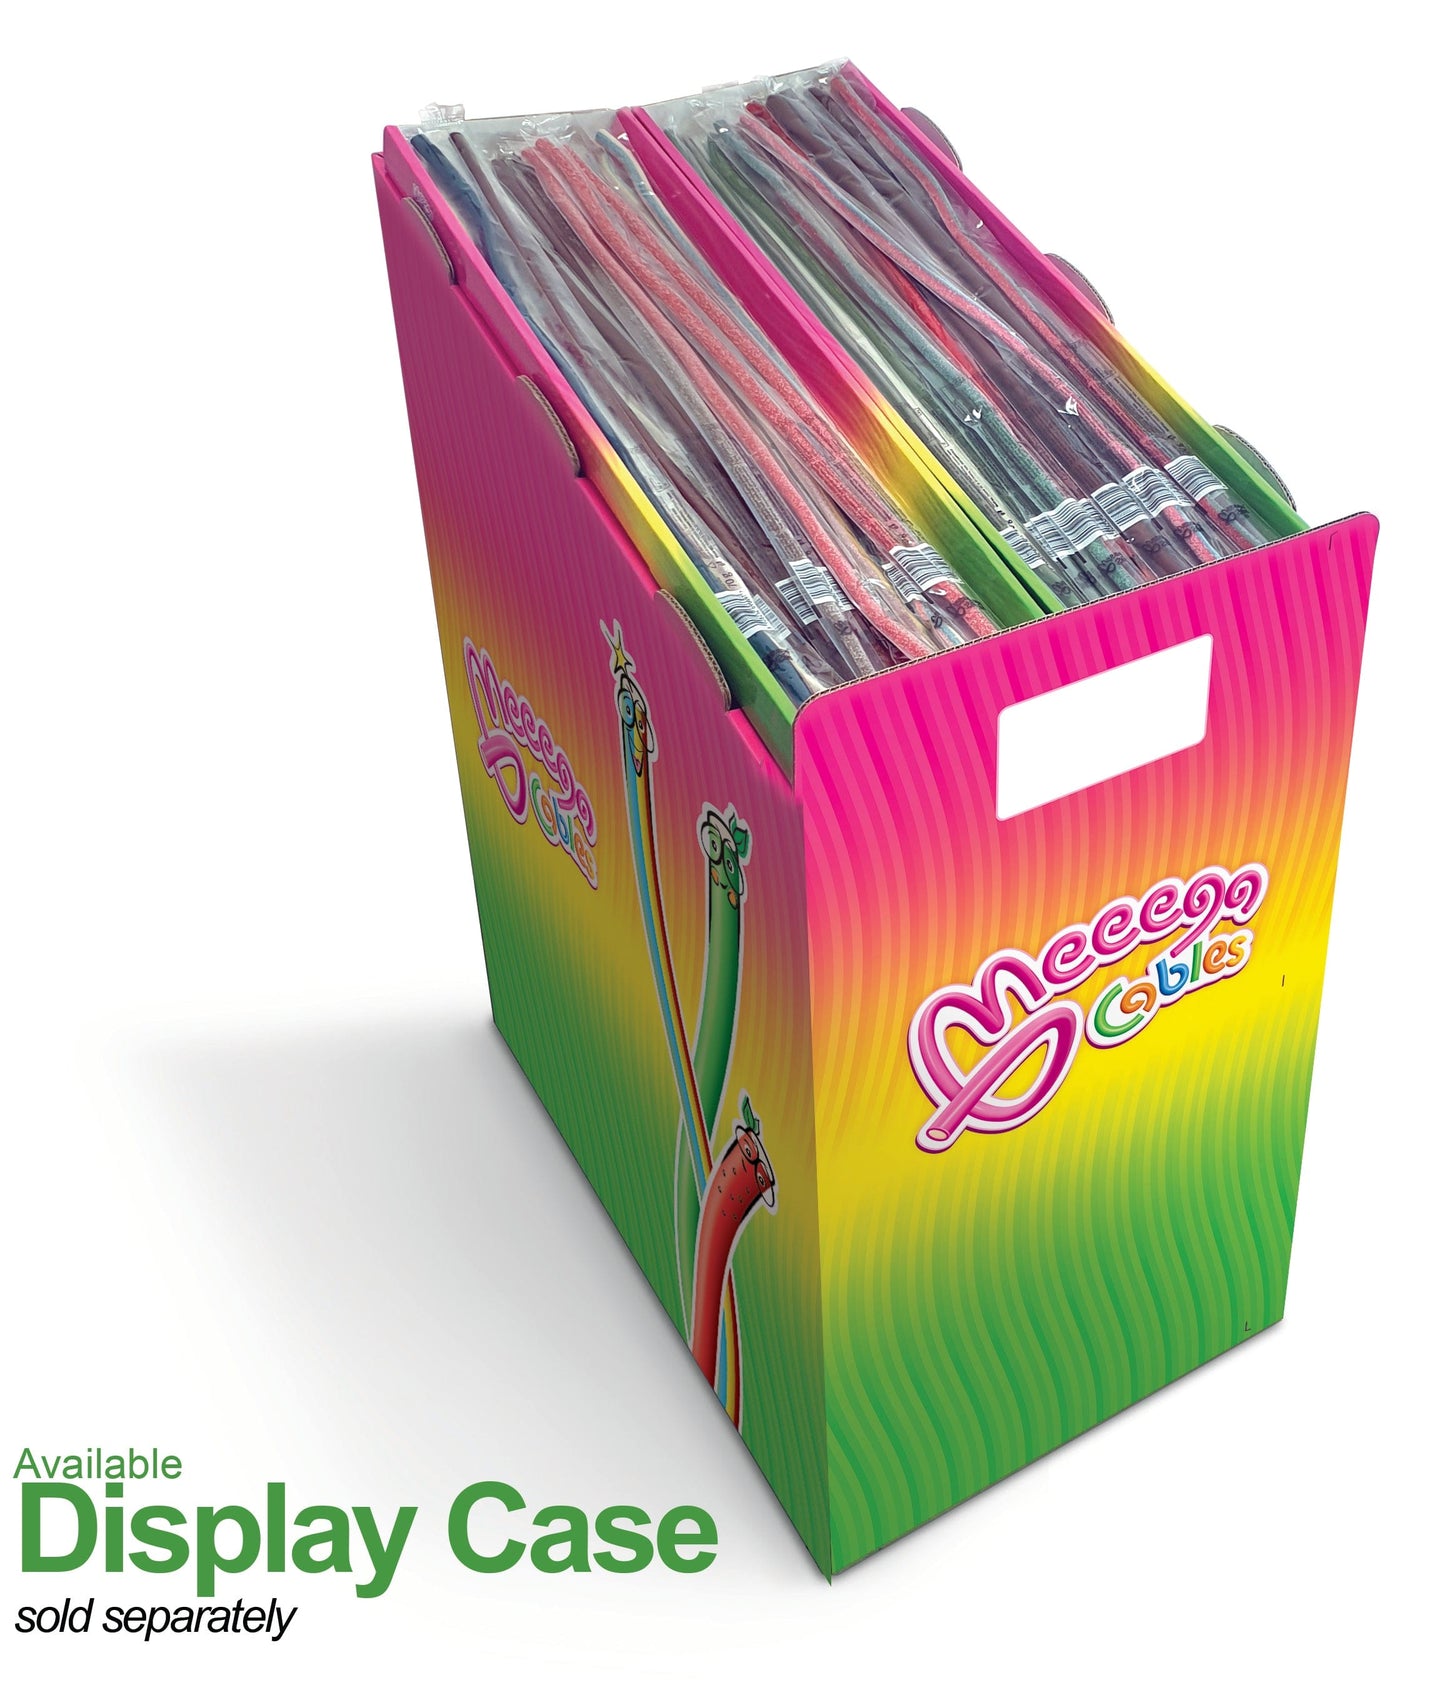 Novelty Concessions Meeega Cables European chewy rope candy - Box of 30 individually wrapped Meeega Cables, each over 2-feet long cups with lids and straws